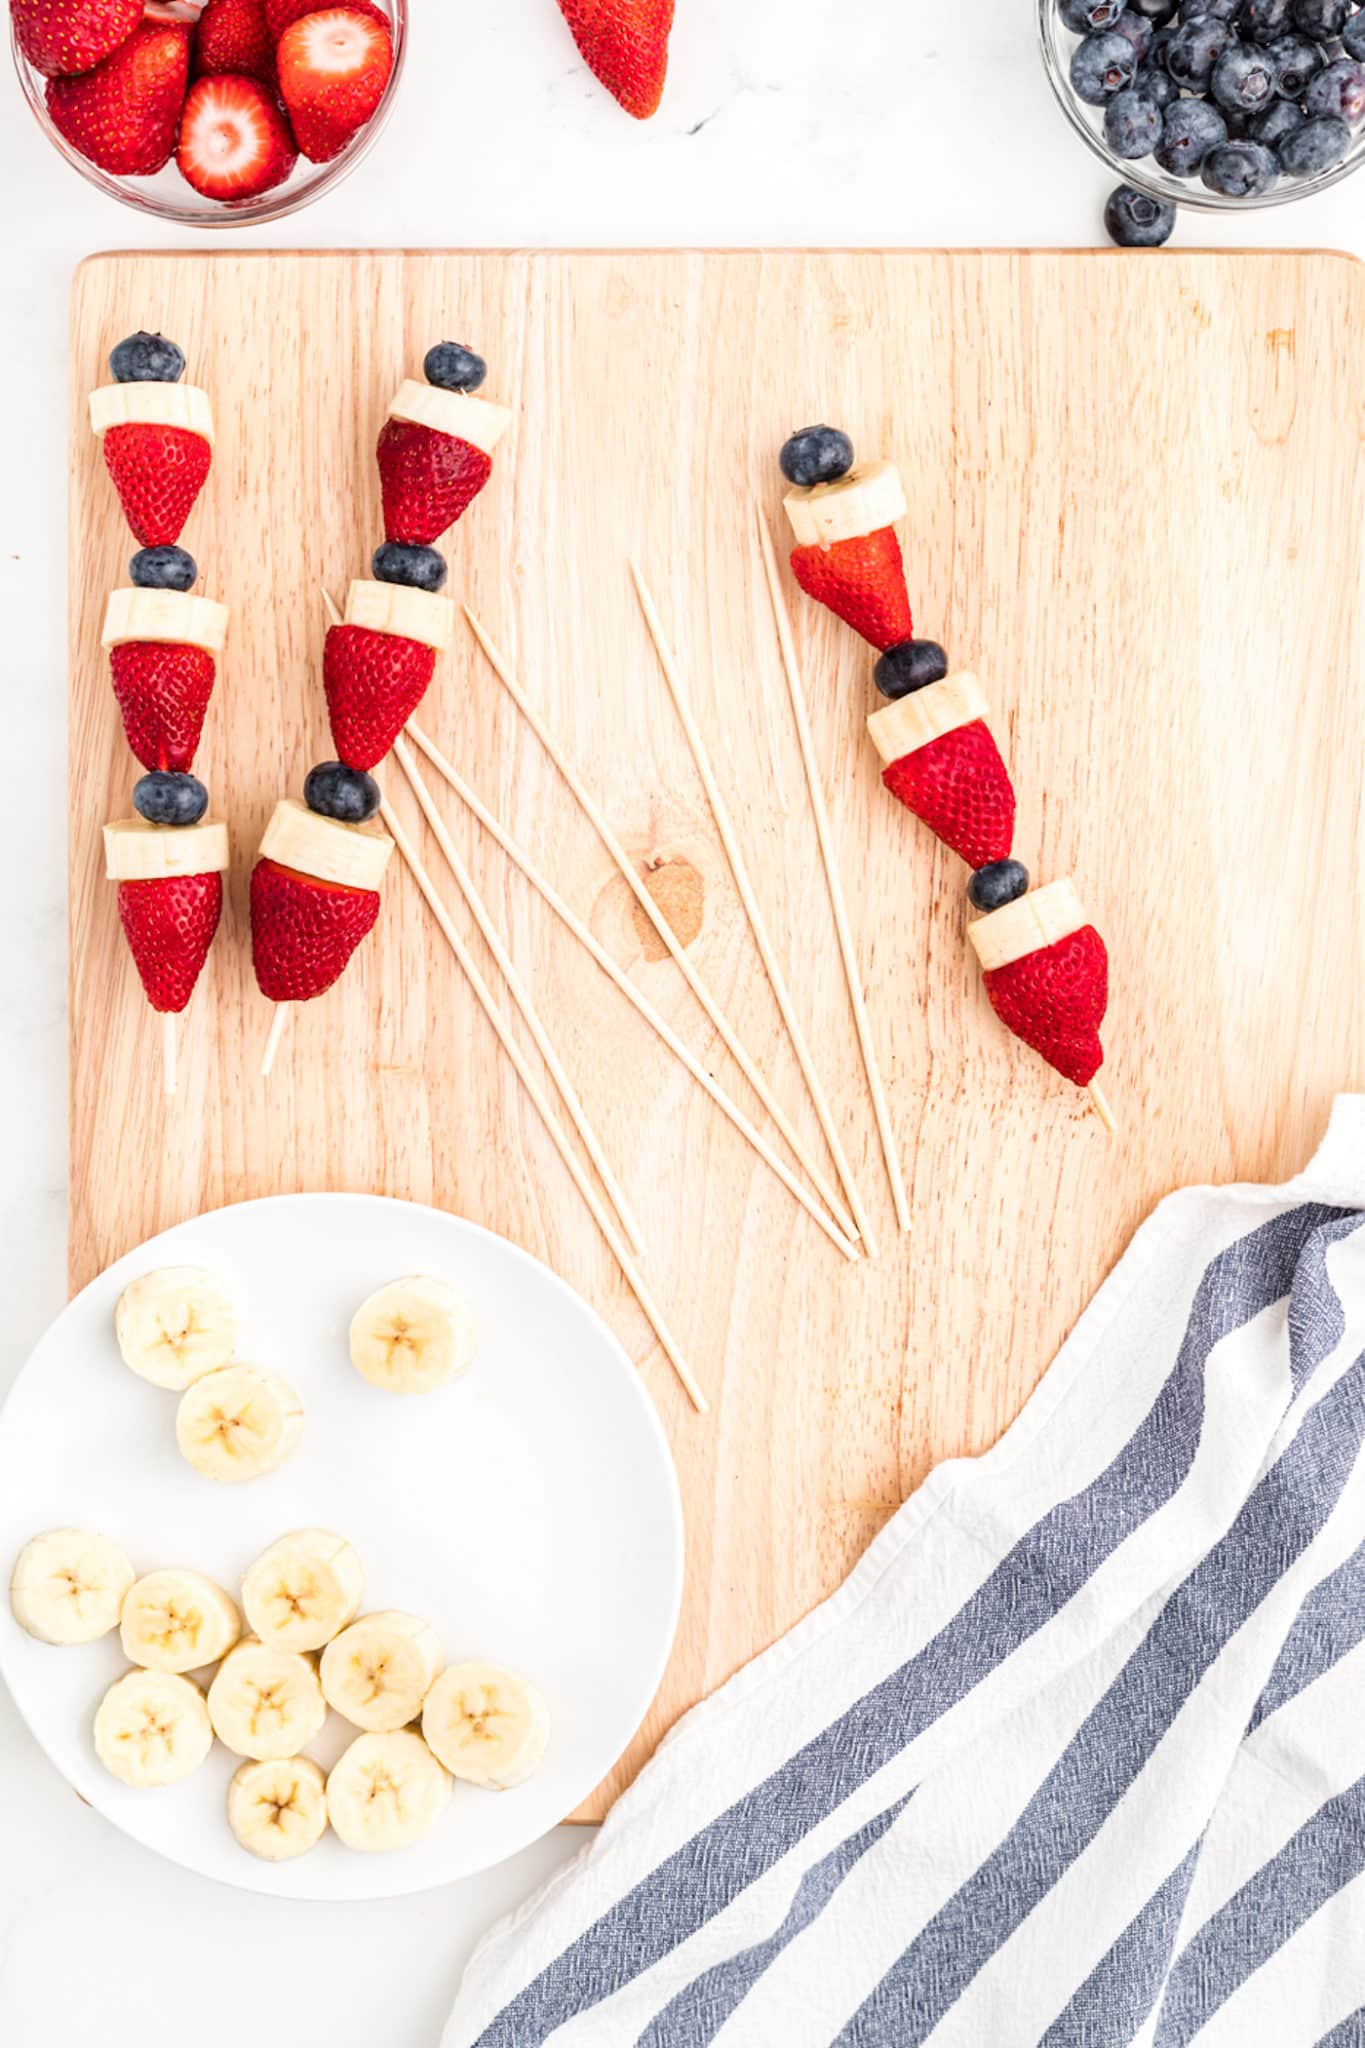 Assembled patriotic fruit kabobs on a wooden cutting board.